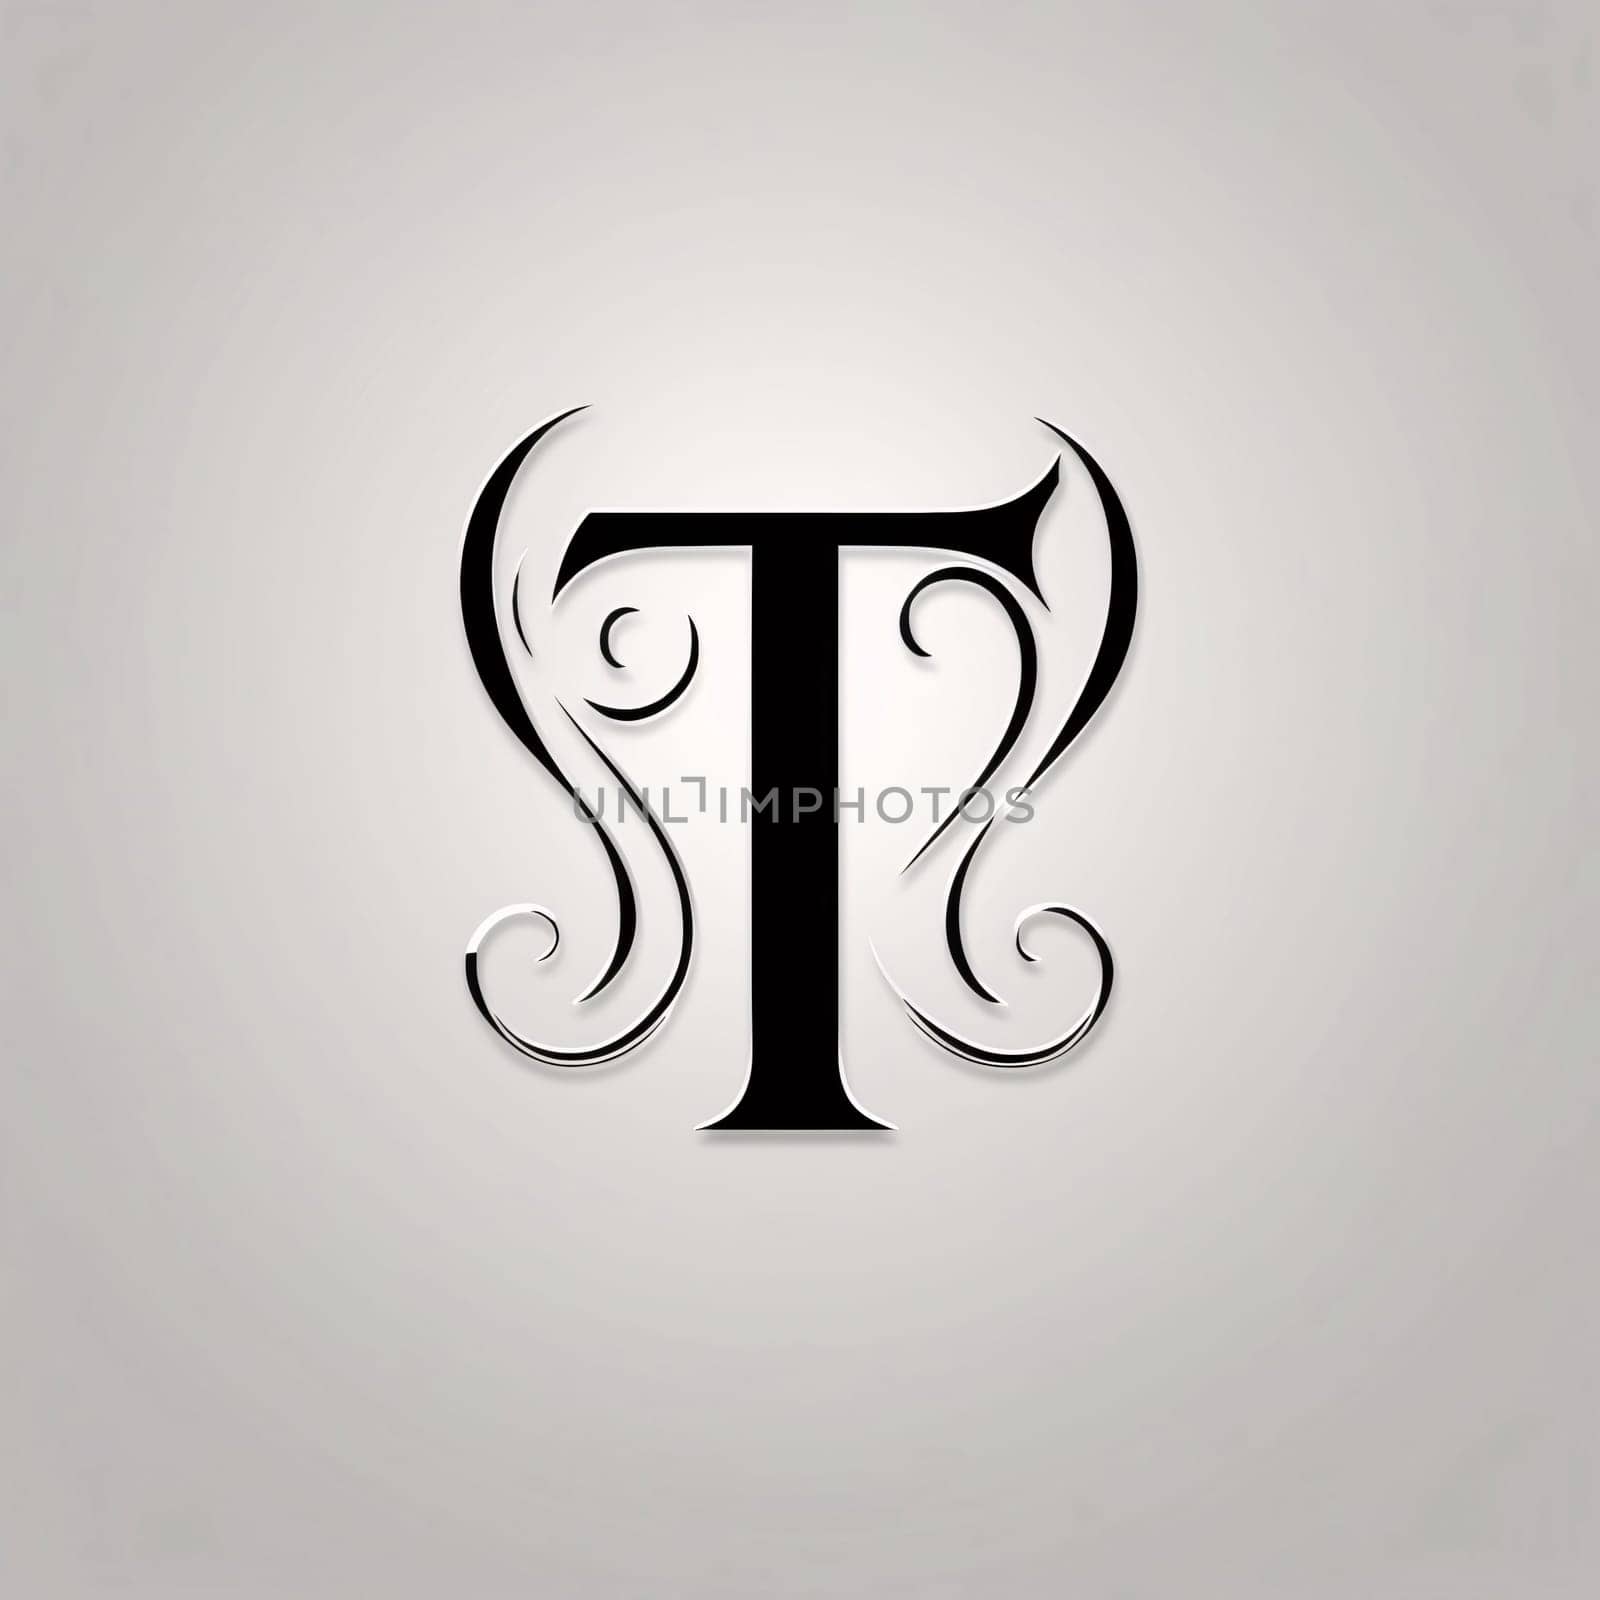 Abstract Elegant Letter T Icon Design Template. Vector Illustration by ThemesS